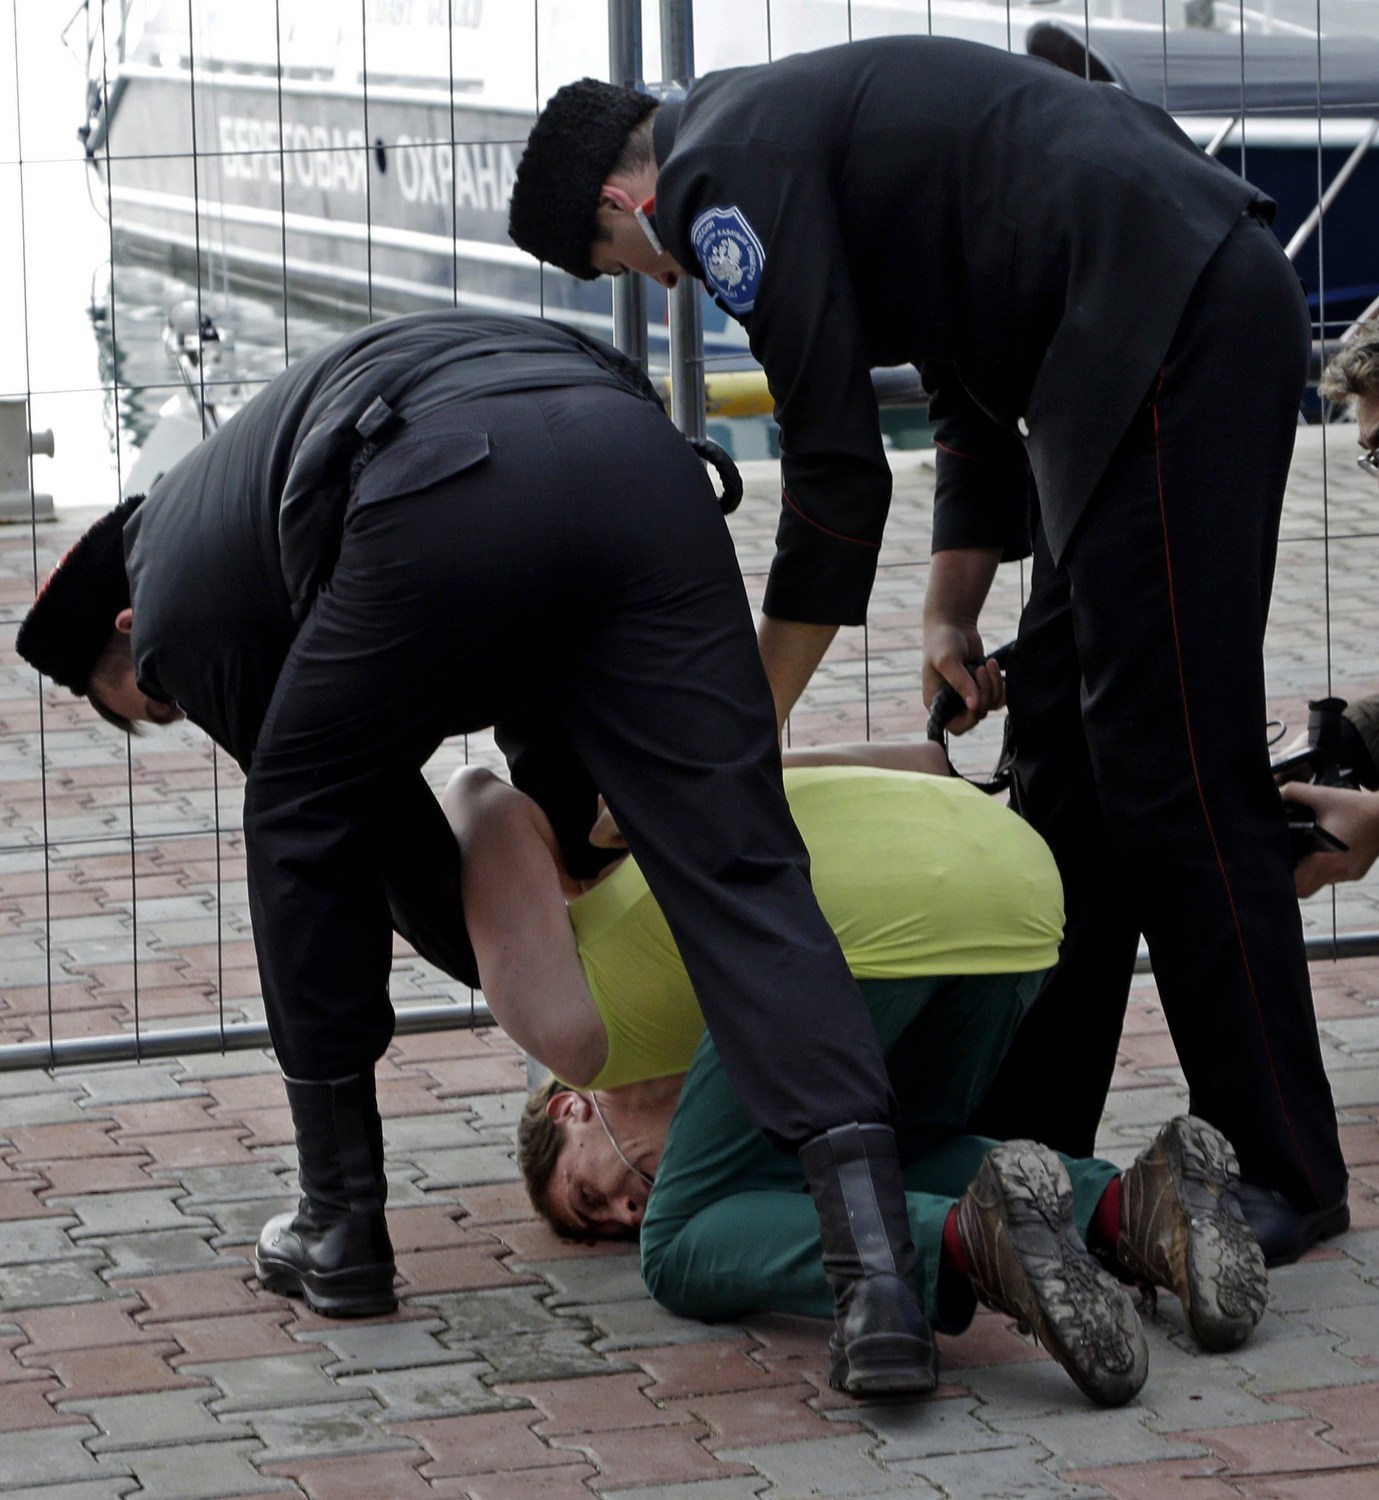 A member of the punk group Pussy Riot is restrained by Cossack militia after the group tried to perform in Sochi, Russia, on Wednesday, Feb. 19, 2014. The group had gathered in a downtown Sochi restaurant, about 30km (21miles) from where the Winter Olympics are being held. They left the restaurant wearing bright dresses and ski masks and had only been performing for a few seconds when they were set upon by Cossacks. (AP Photo/Morry Gash)